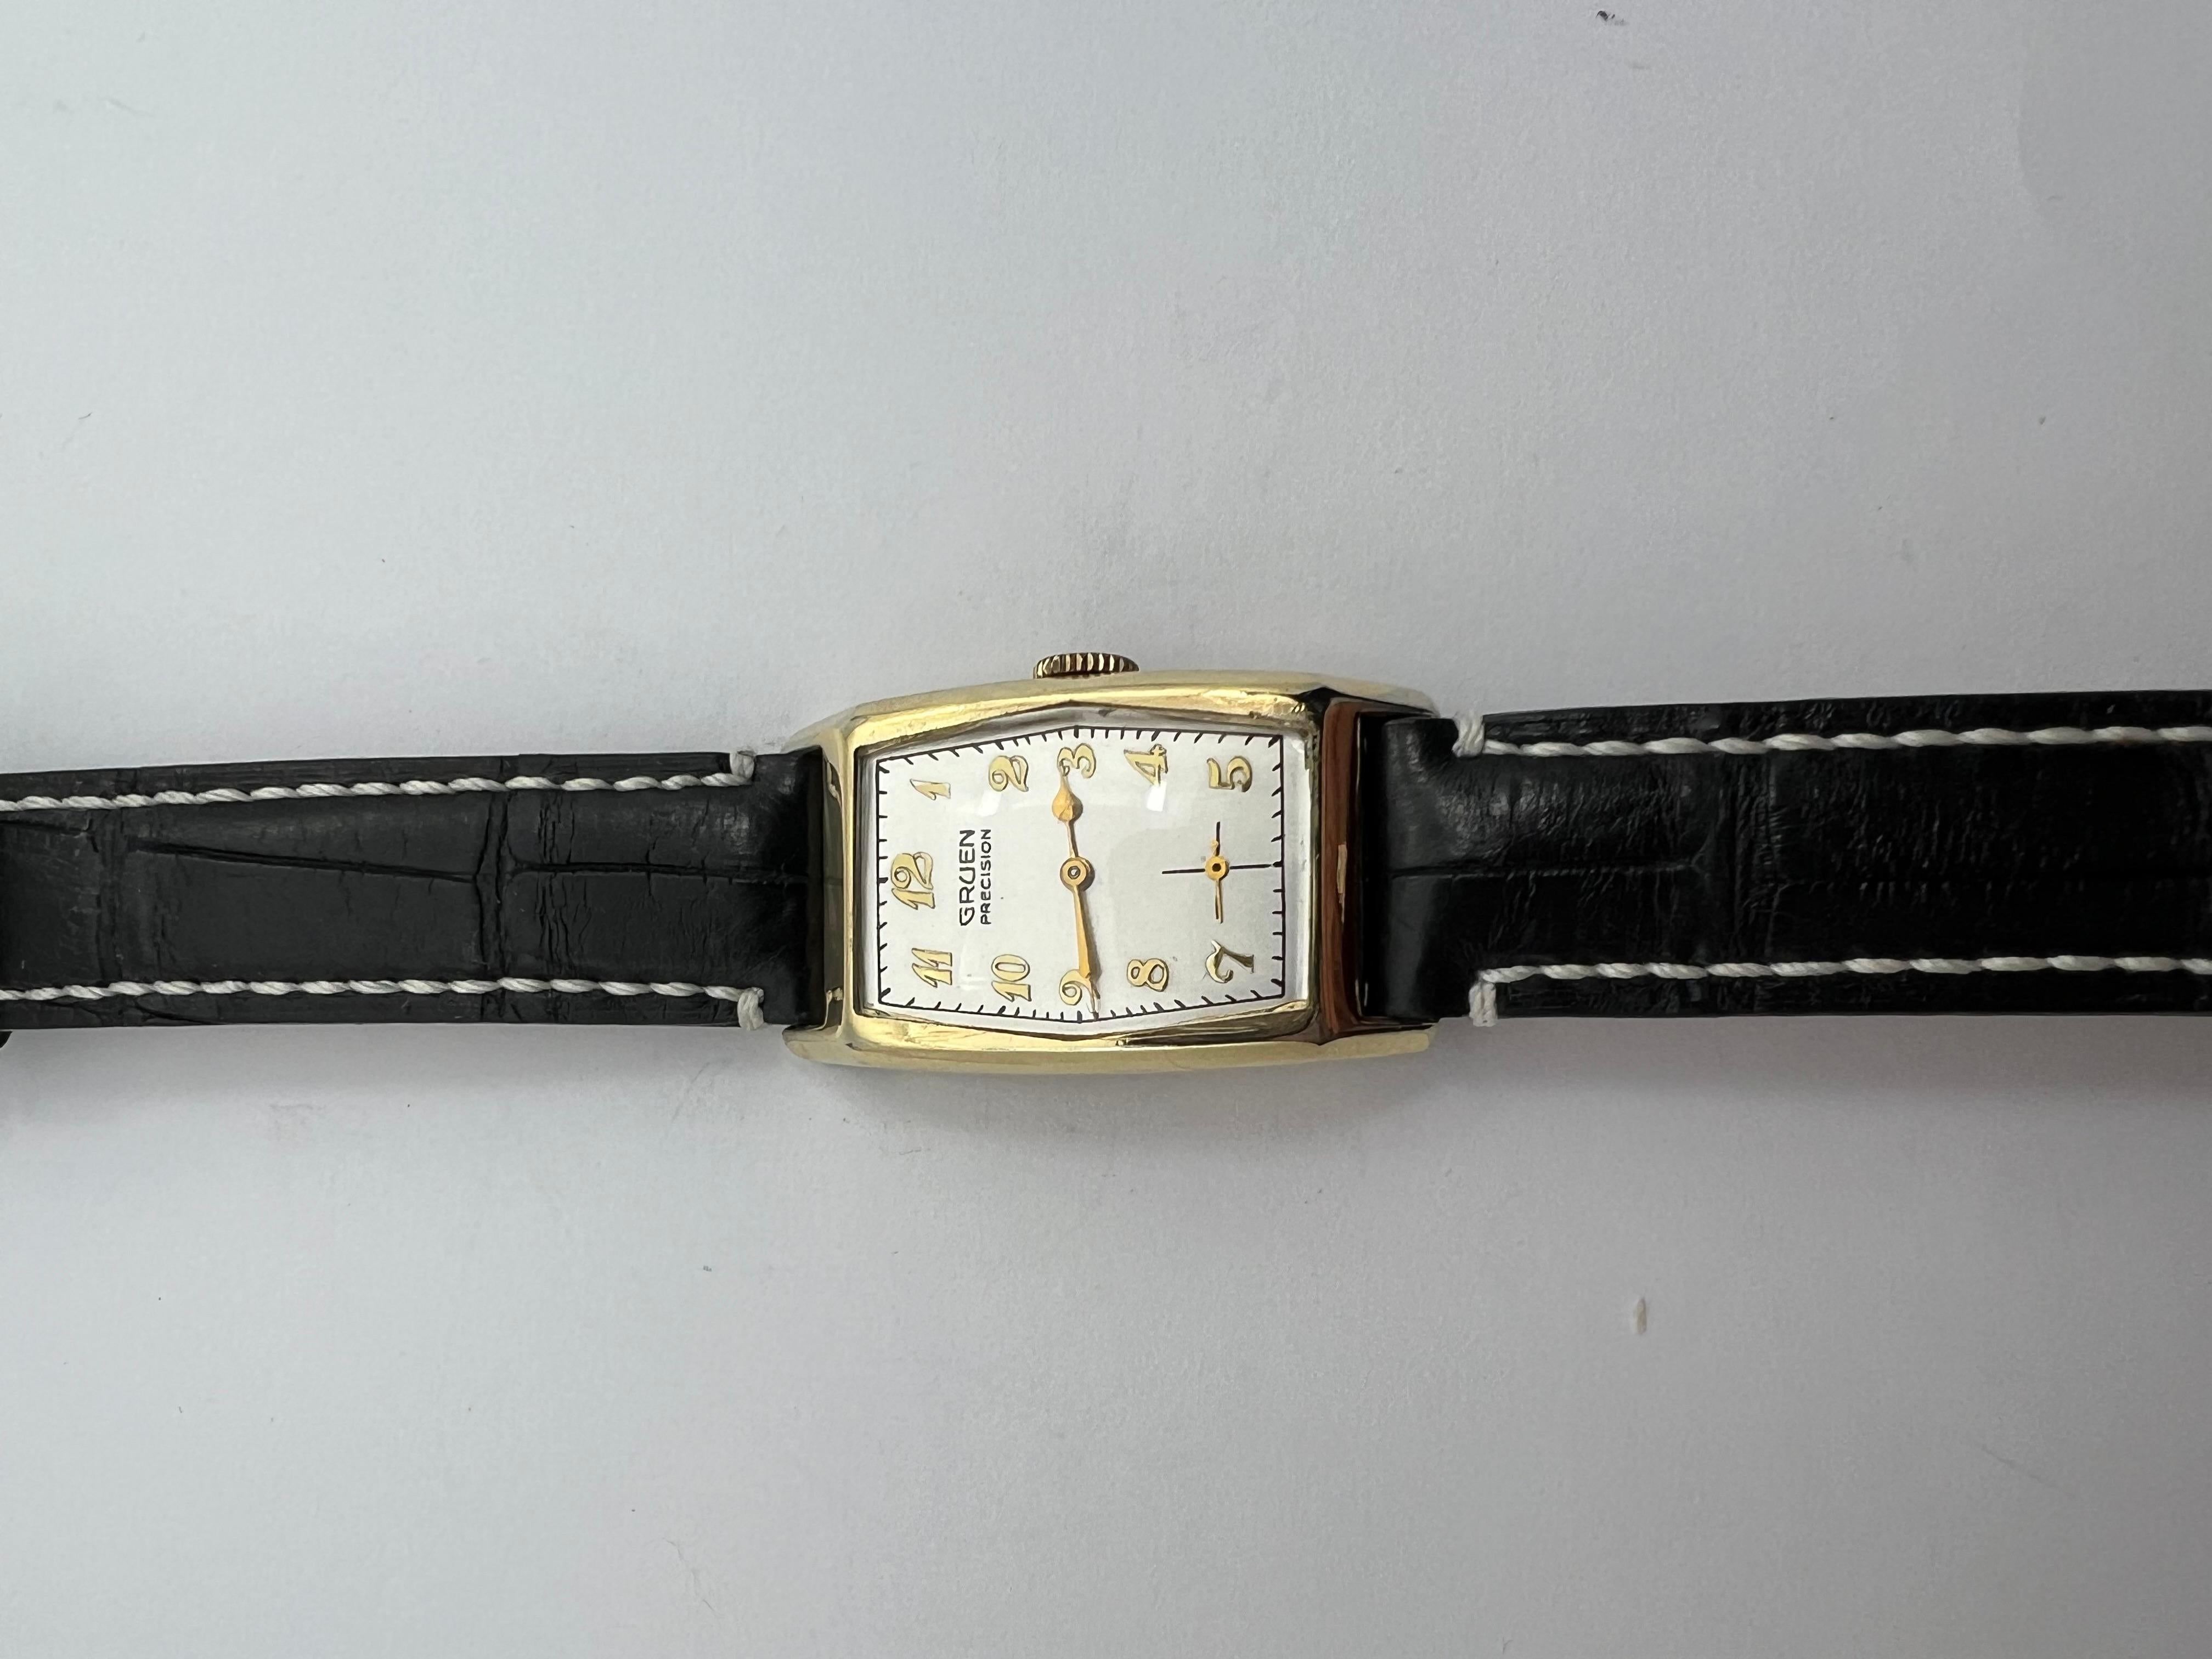 Gruen 325
 
 
Look no further if you like Art Deco watches. The Gruen Quadron series epitomizes that era. Look at the design and simplicity. The Quadron in 1925 was considered a design and engineering hallmark of watchmaking at the time! It is one